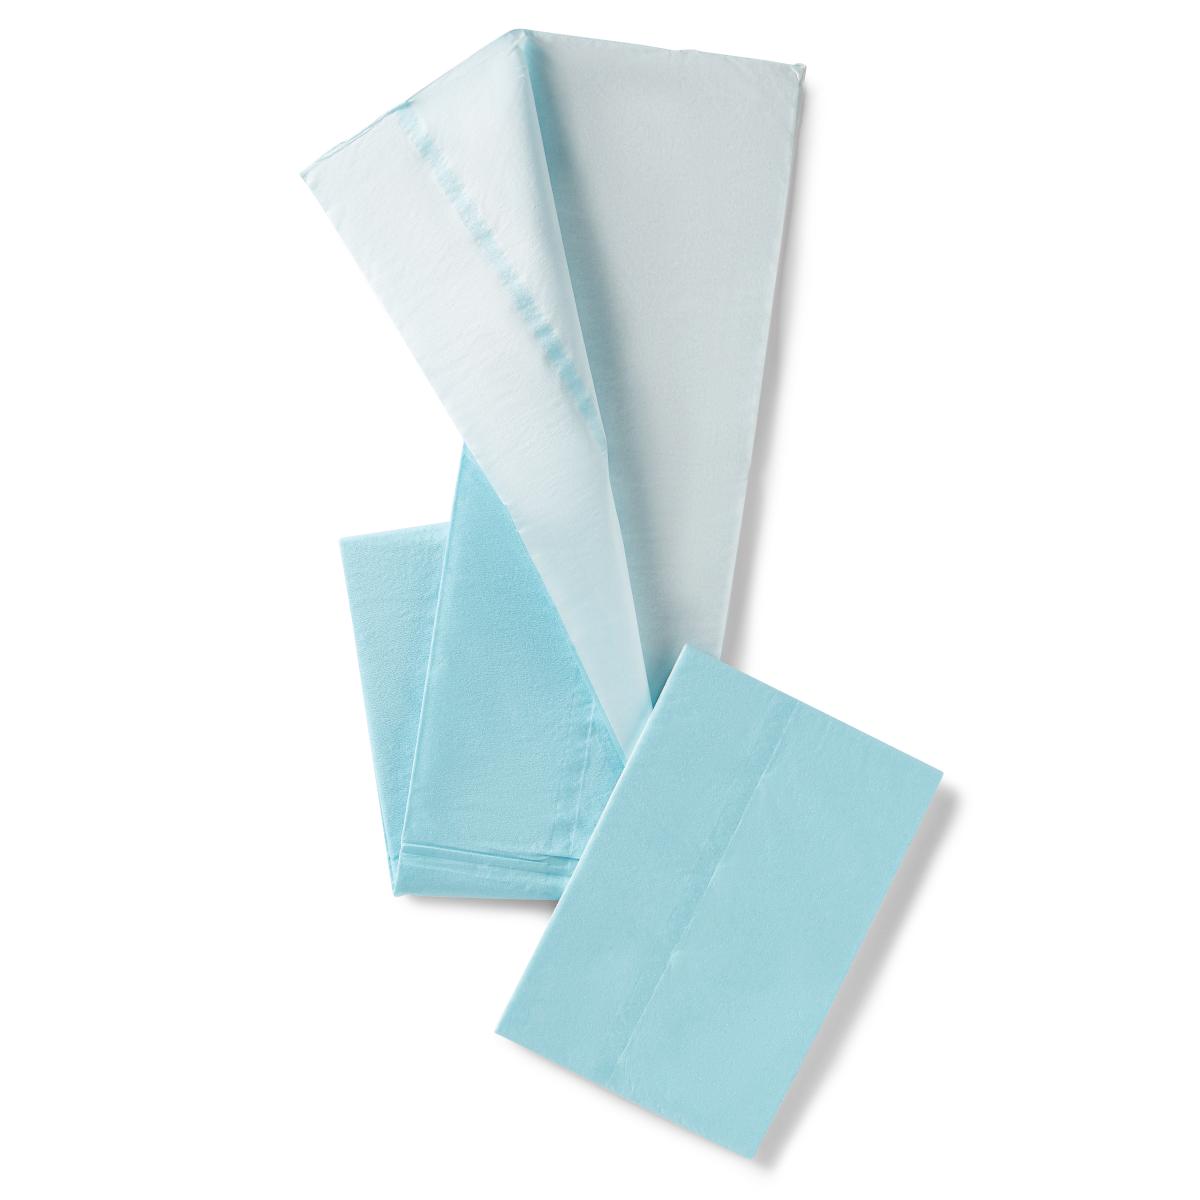 Sterile Disposable Drapes Case of 300